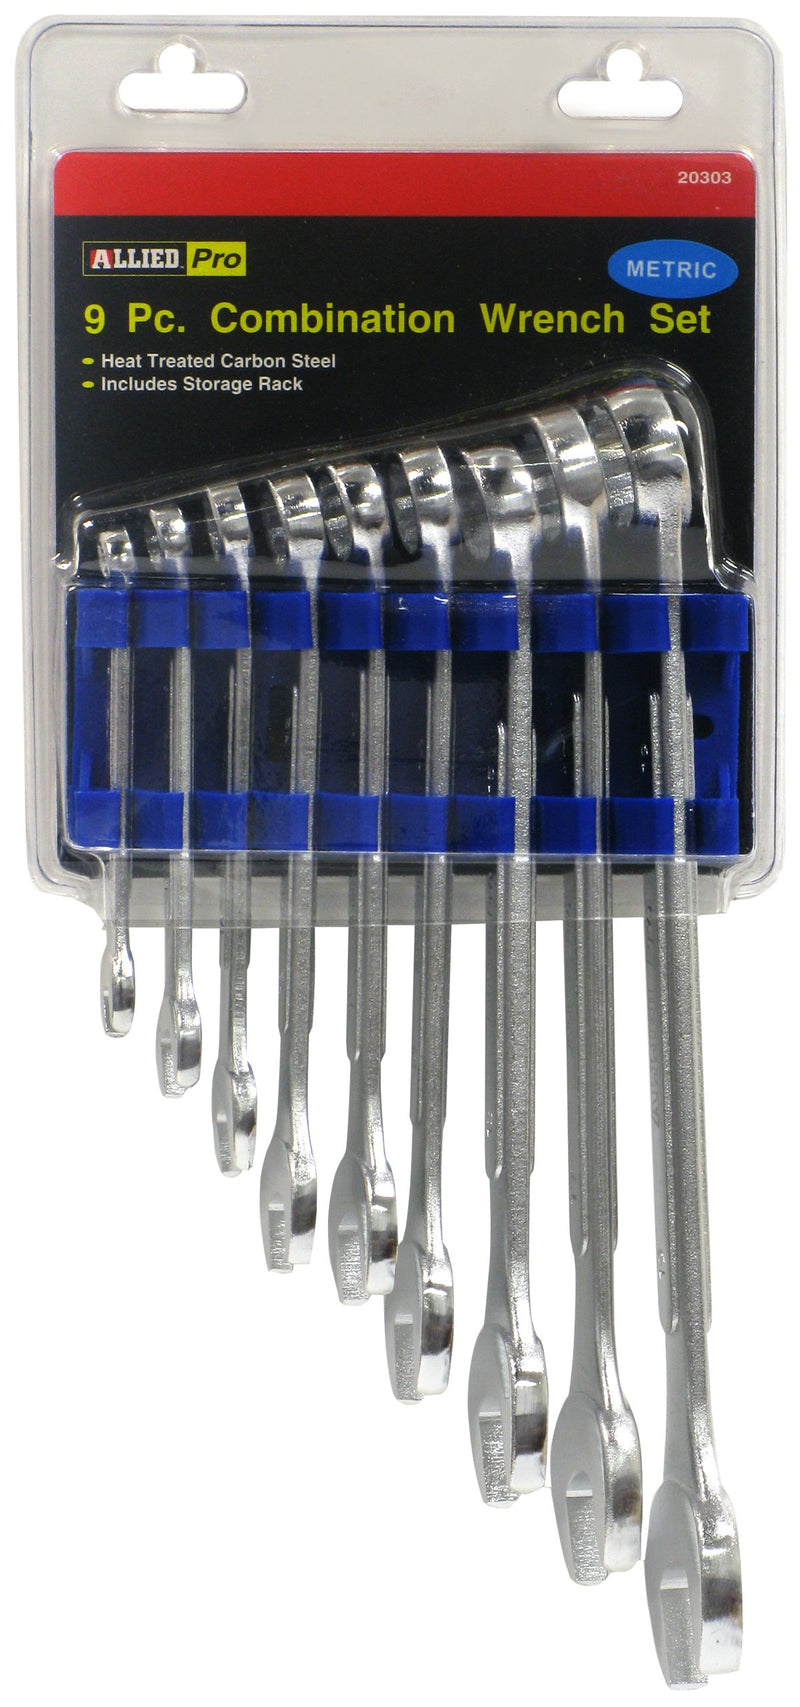 Allied 20303 Metric Full Polished Combination Wrench Set - 9 Piece